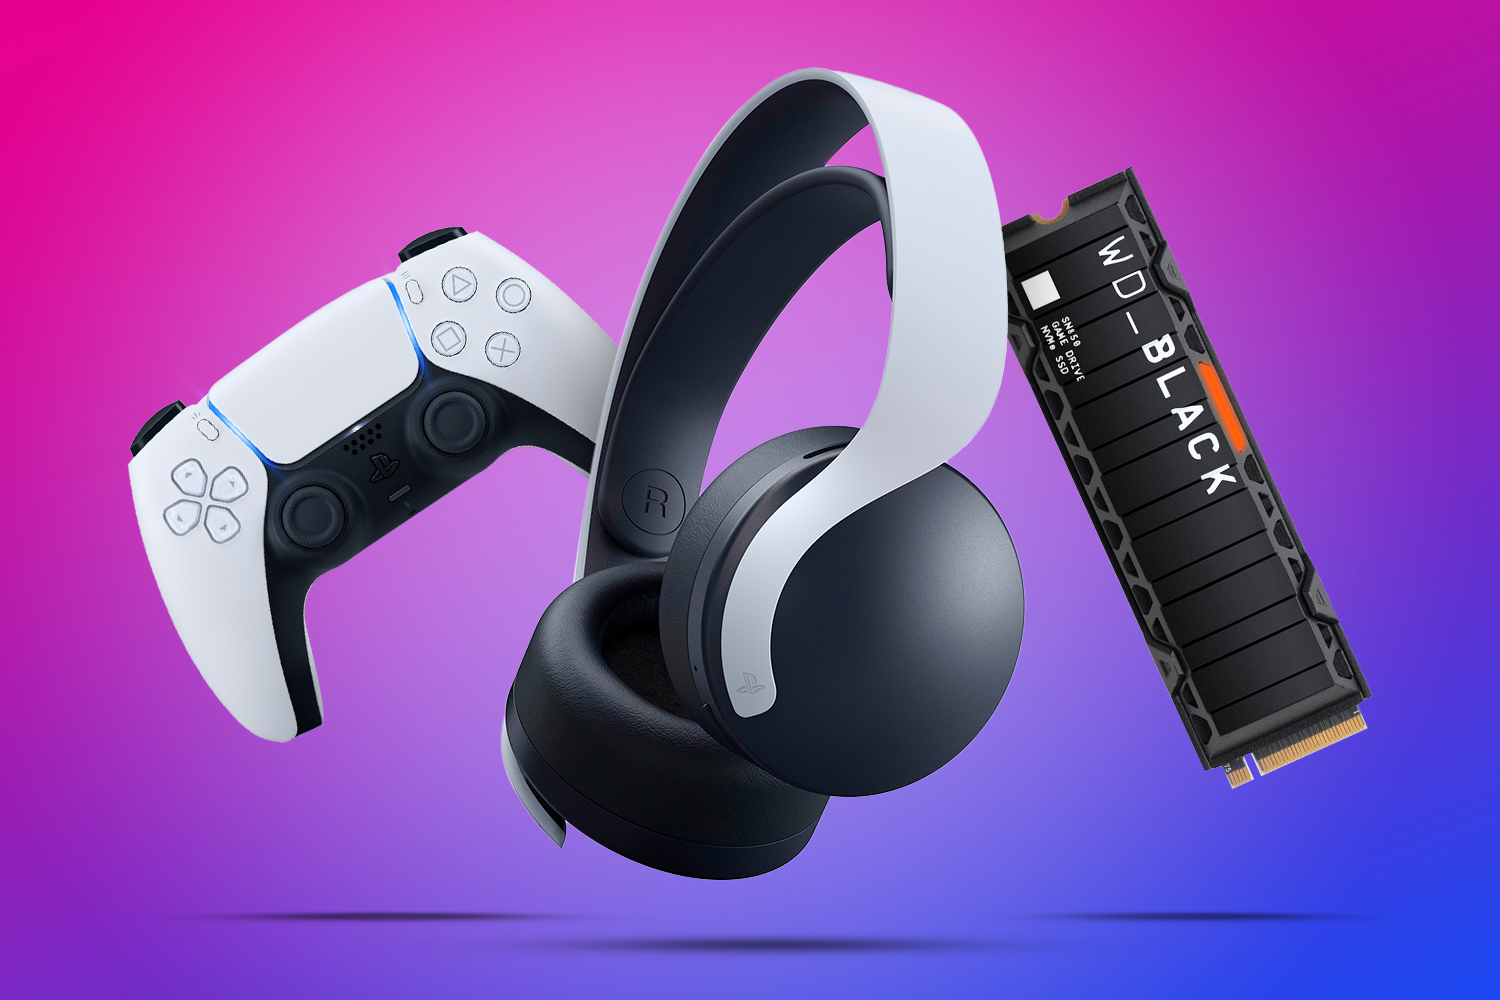 Best PS5 accessories you can buy right now